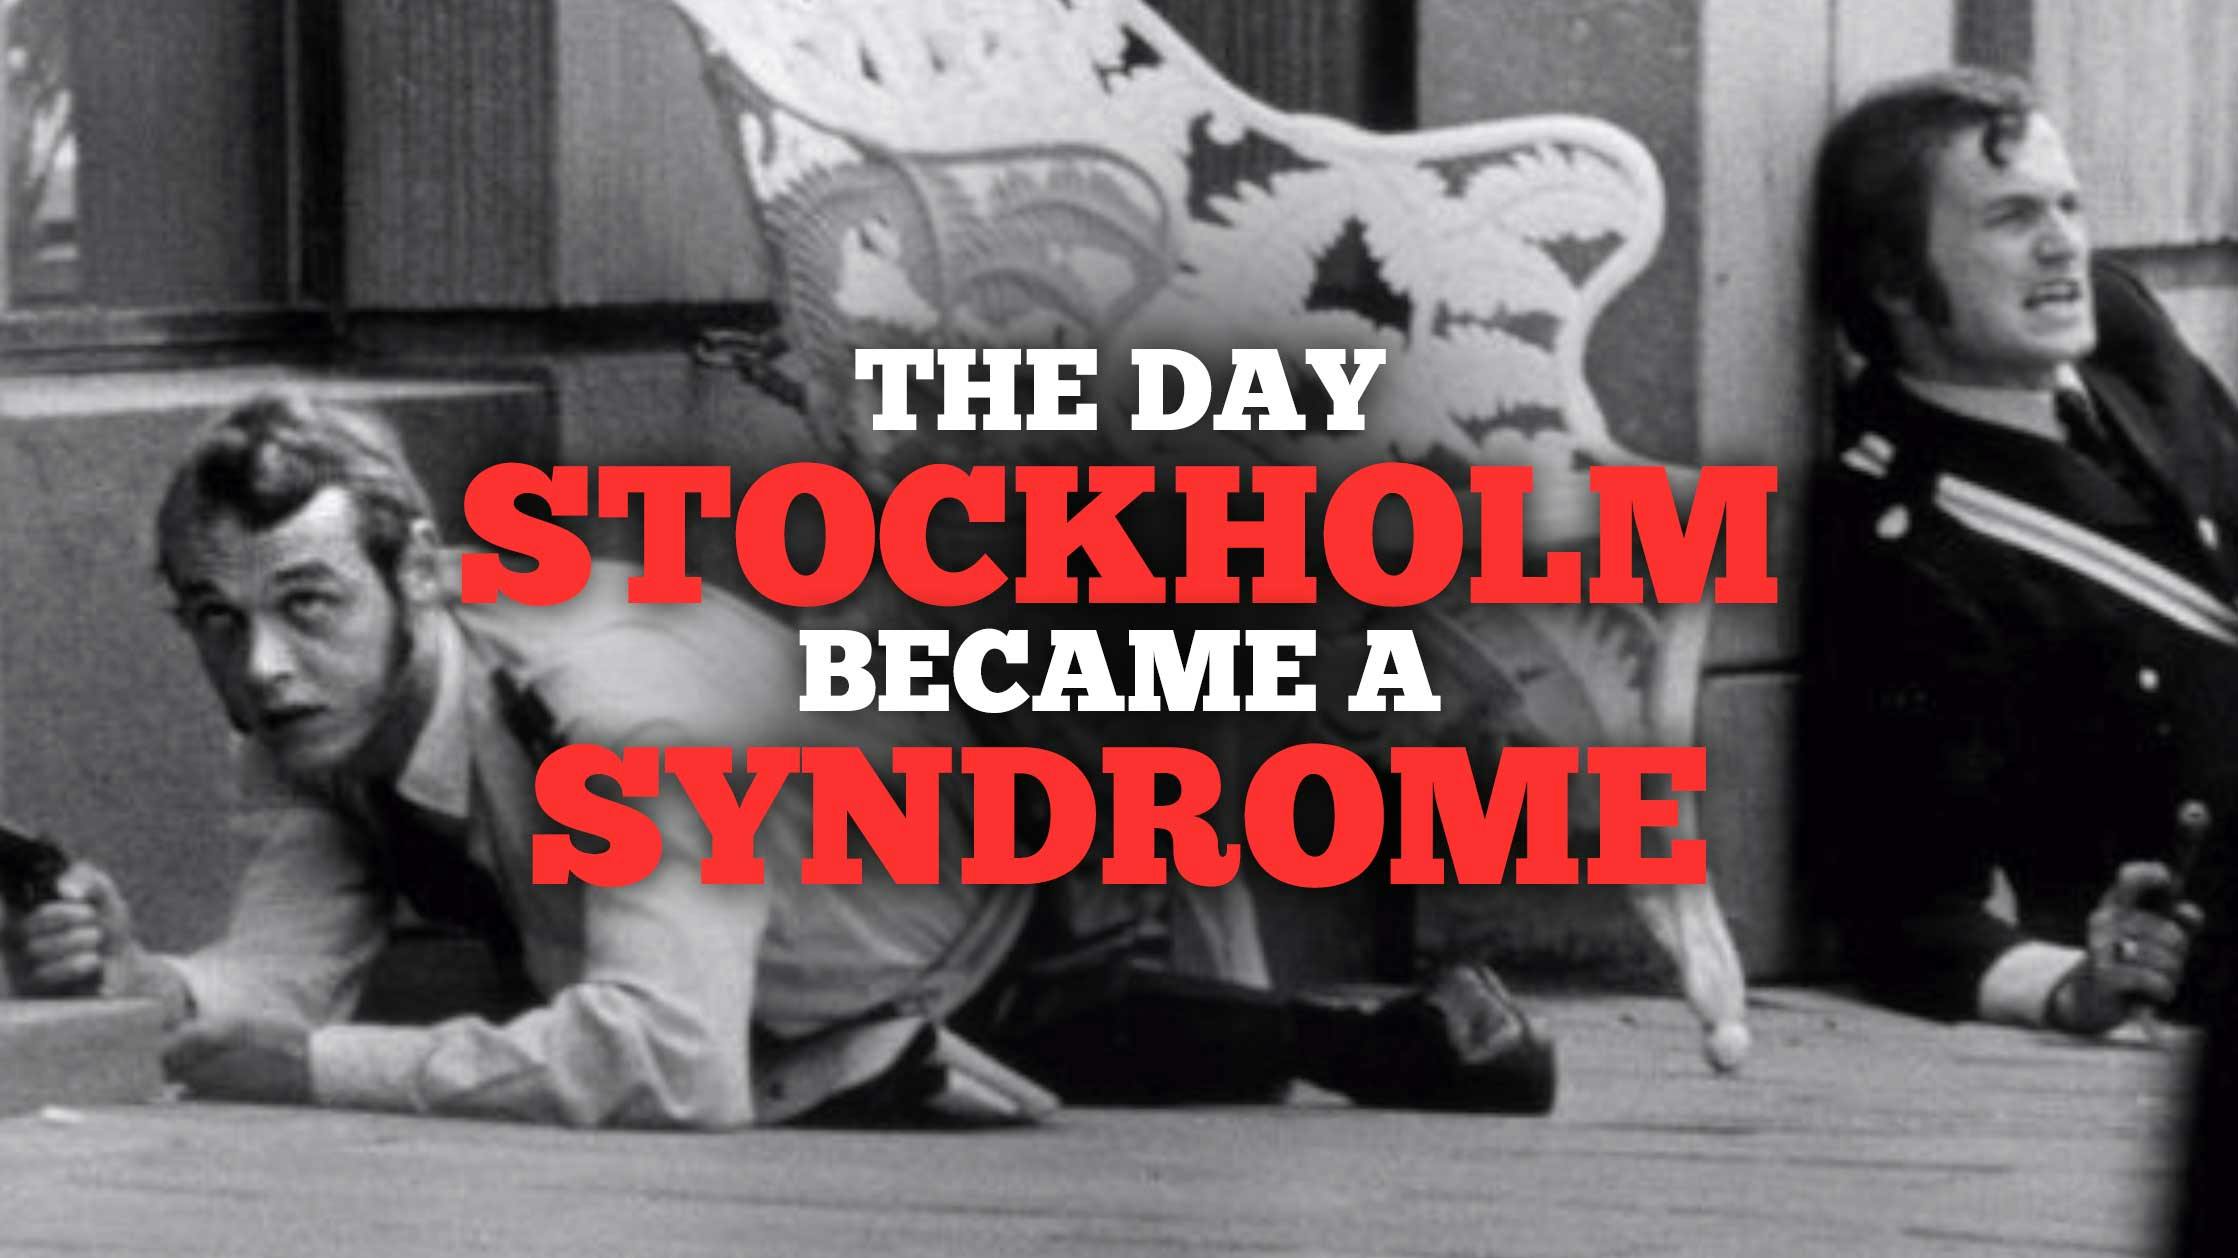 The Day Stockholm Became A Syndrome